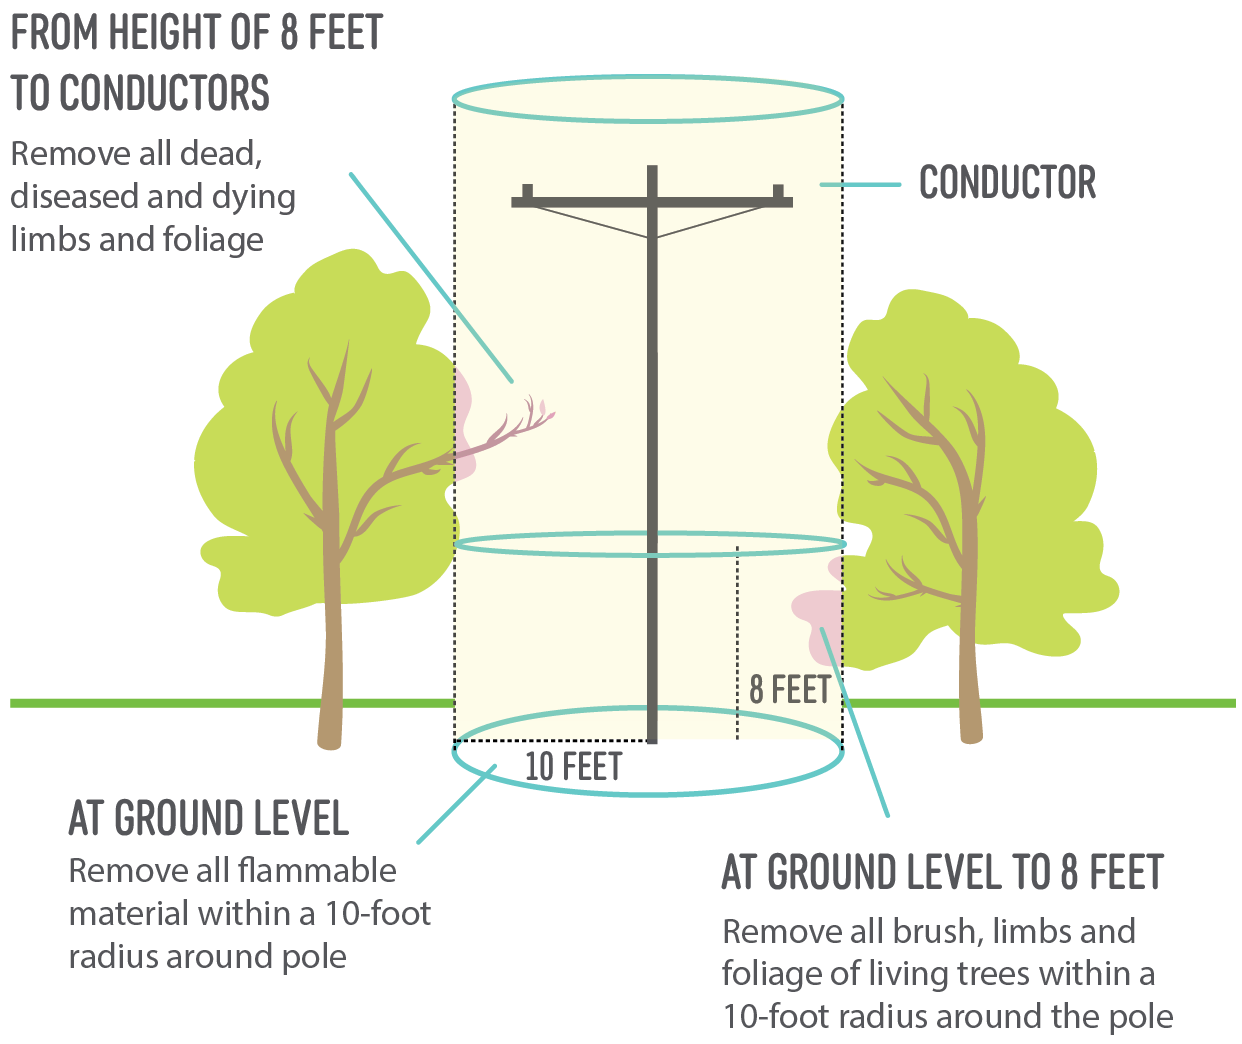 A diagram of a power line from the height of 8 feet to conductors: Remove all dead, diseased, and dying limbs and foliage. The conductor is located at the top of the power pole. At ground level, remove all flammable material within a 10-foot radius around the pole. At Ground Level to 8 feet, remove all brush, limbs, and foliage of living trees within a 10-foot radius around the pole.